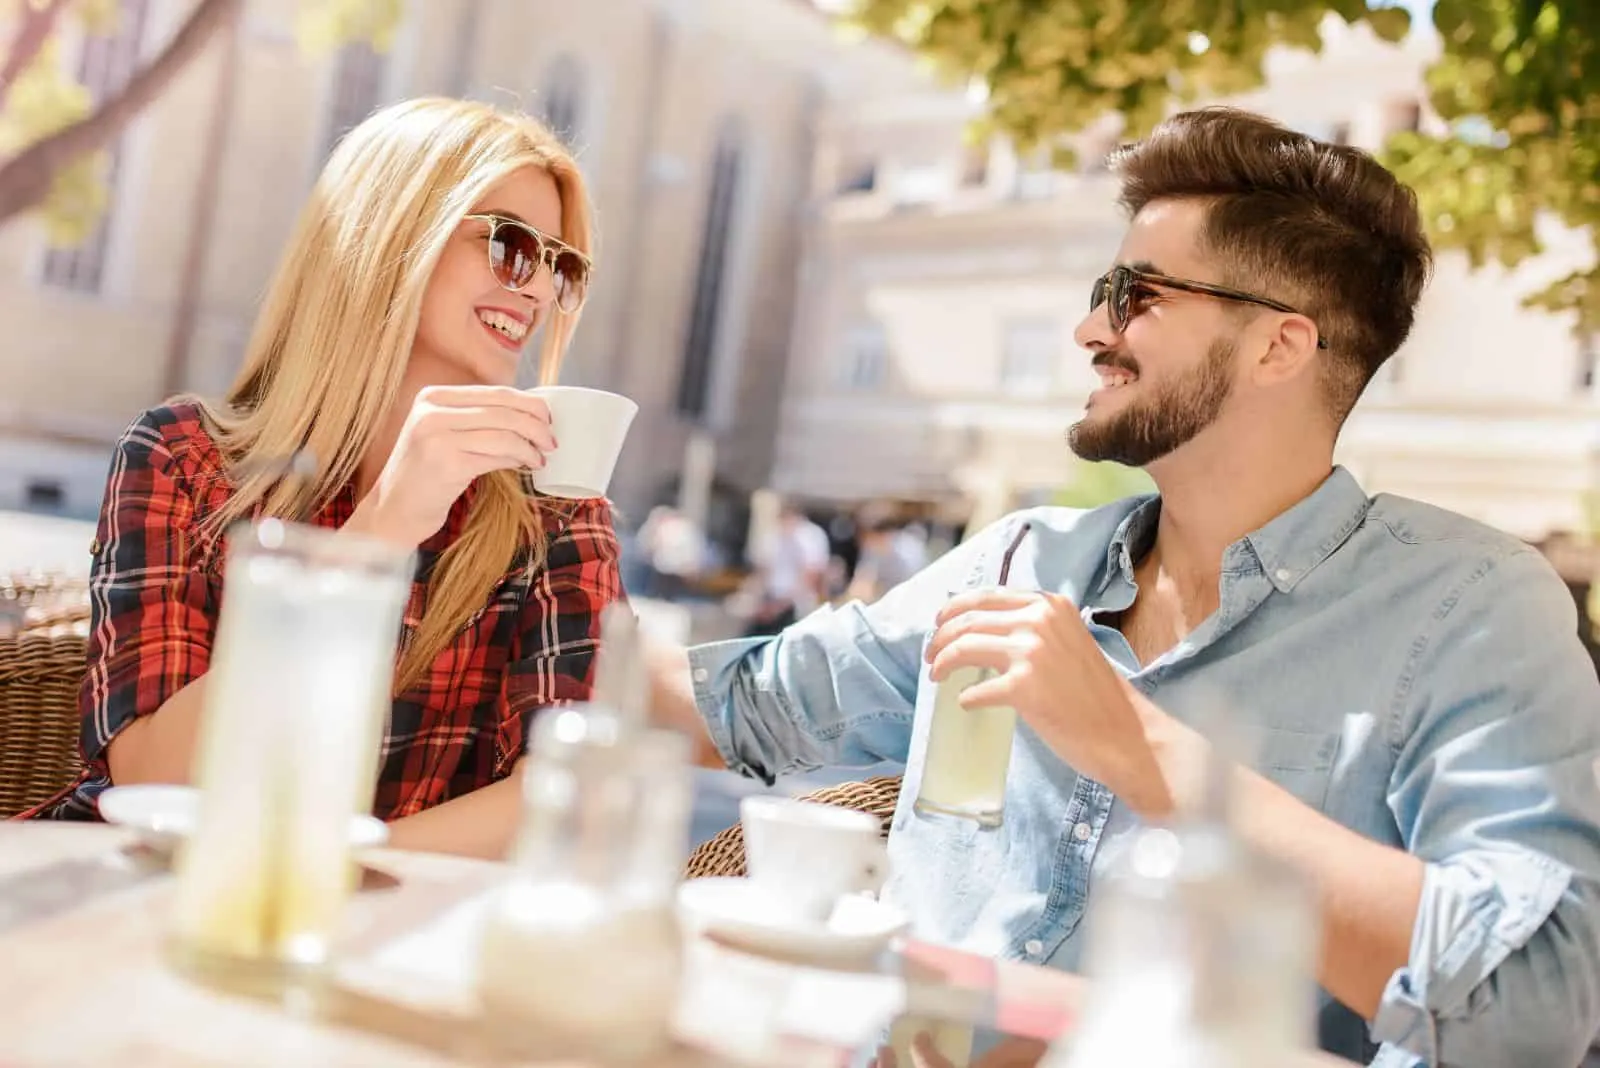 smiling girl sitting outdoors with a man and talking